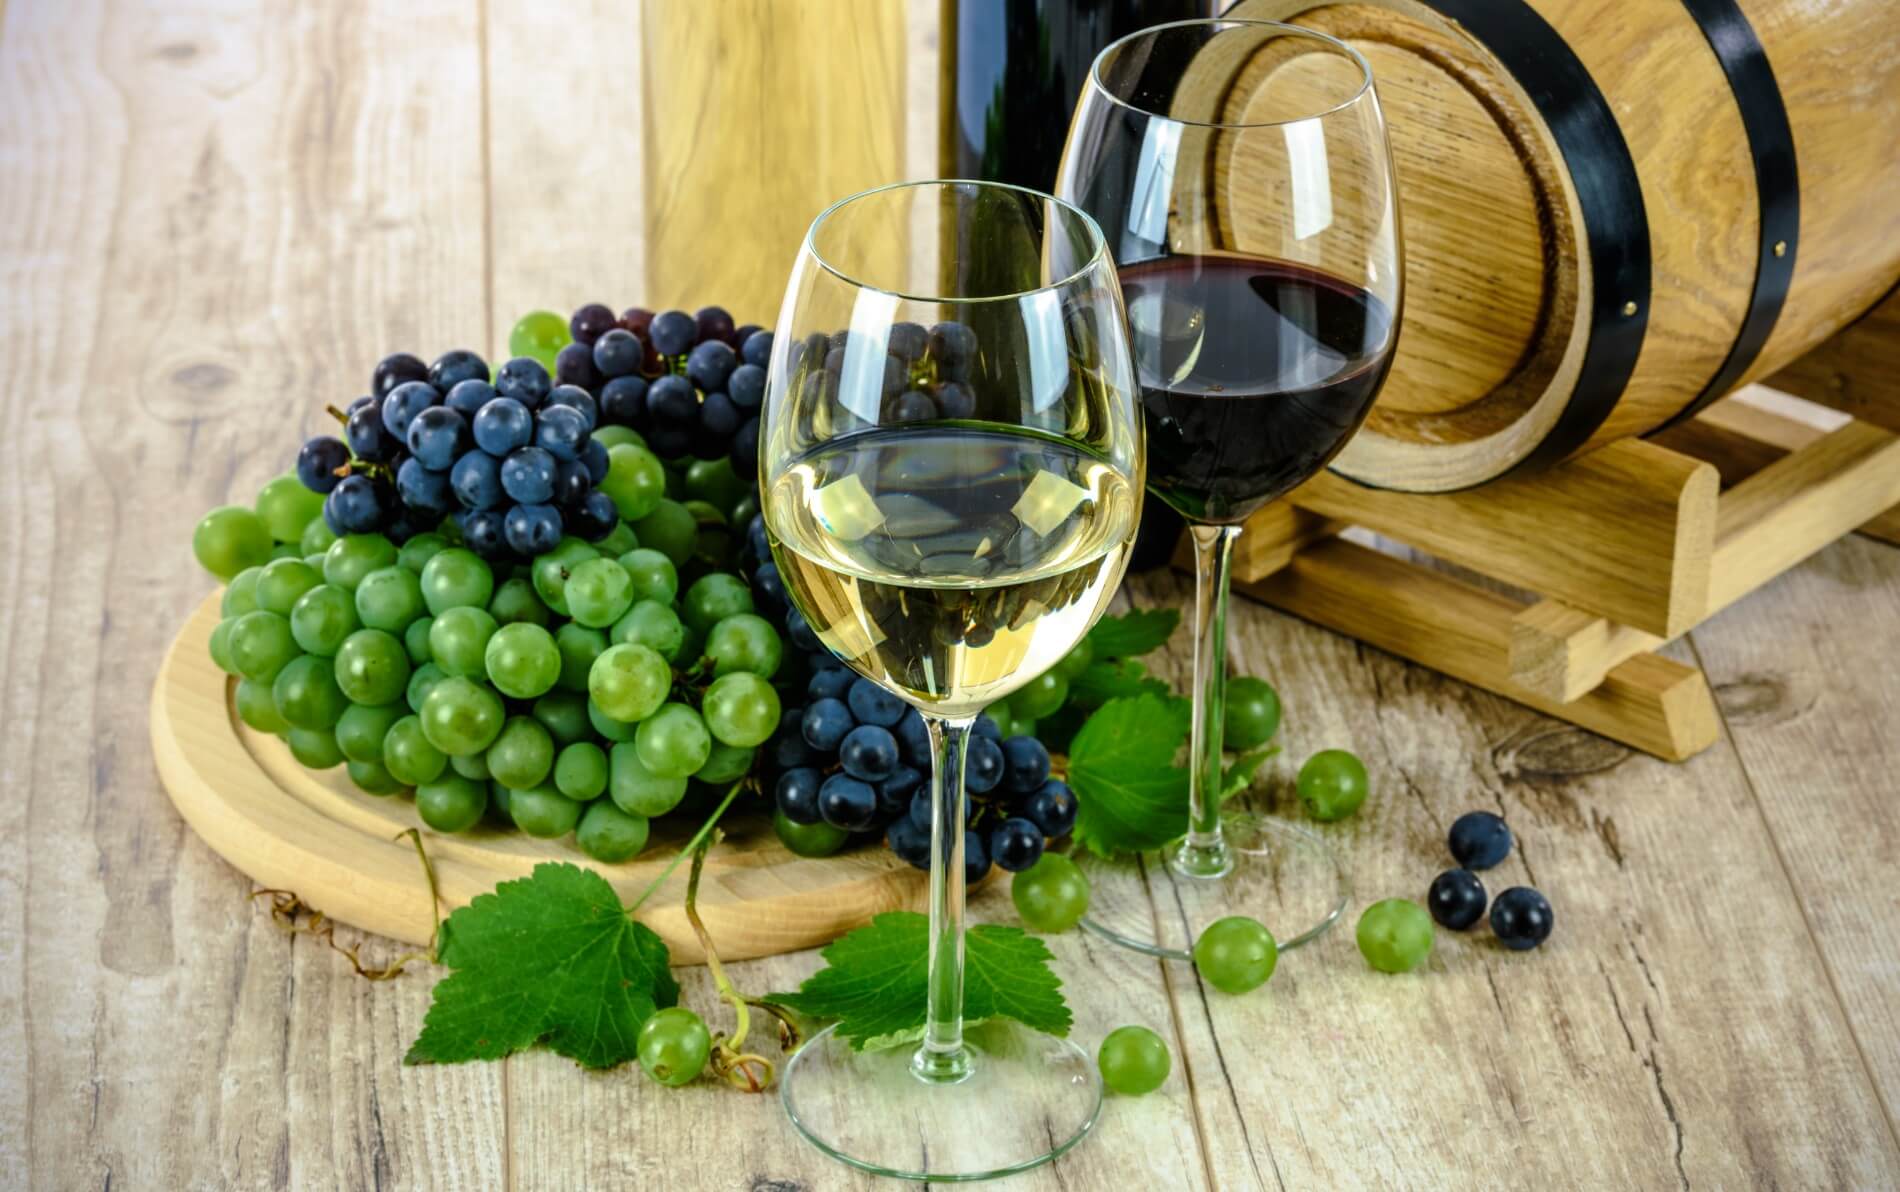 Wooden table with purple and green grapes near a glass of white wine and red wine